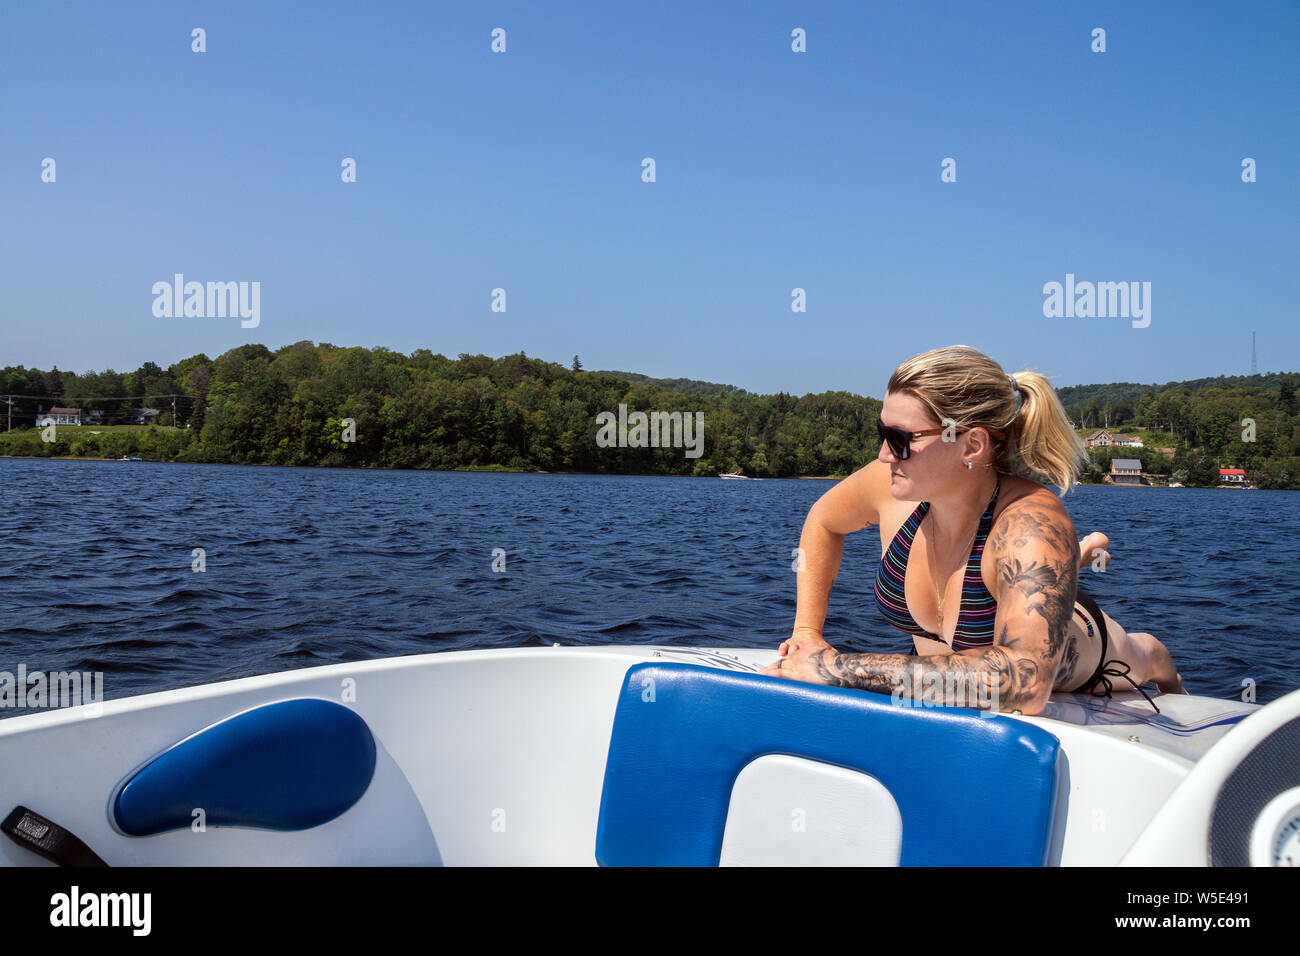 Blond caucasian woman sunbathing on a boat deck on a lake at summer Stock Photo